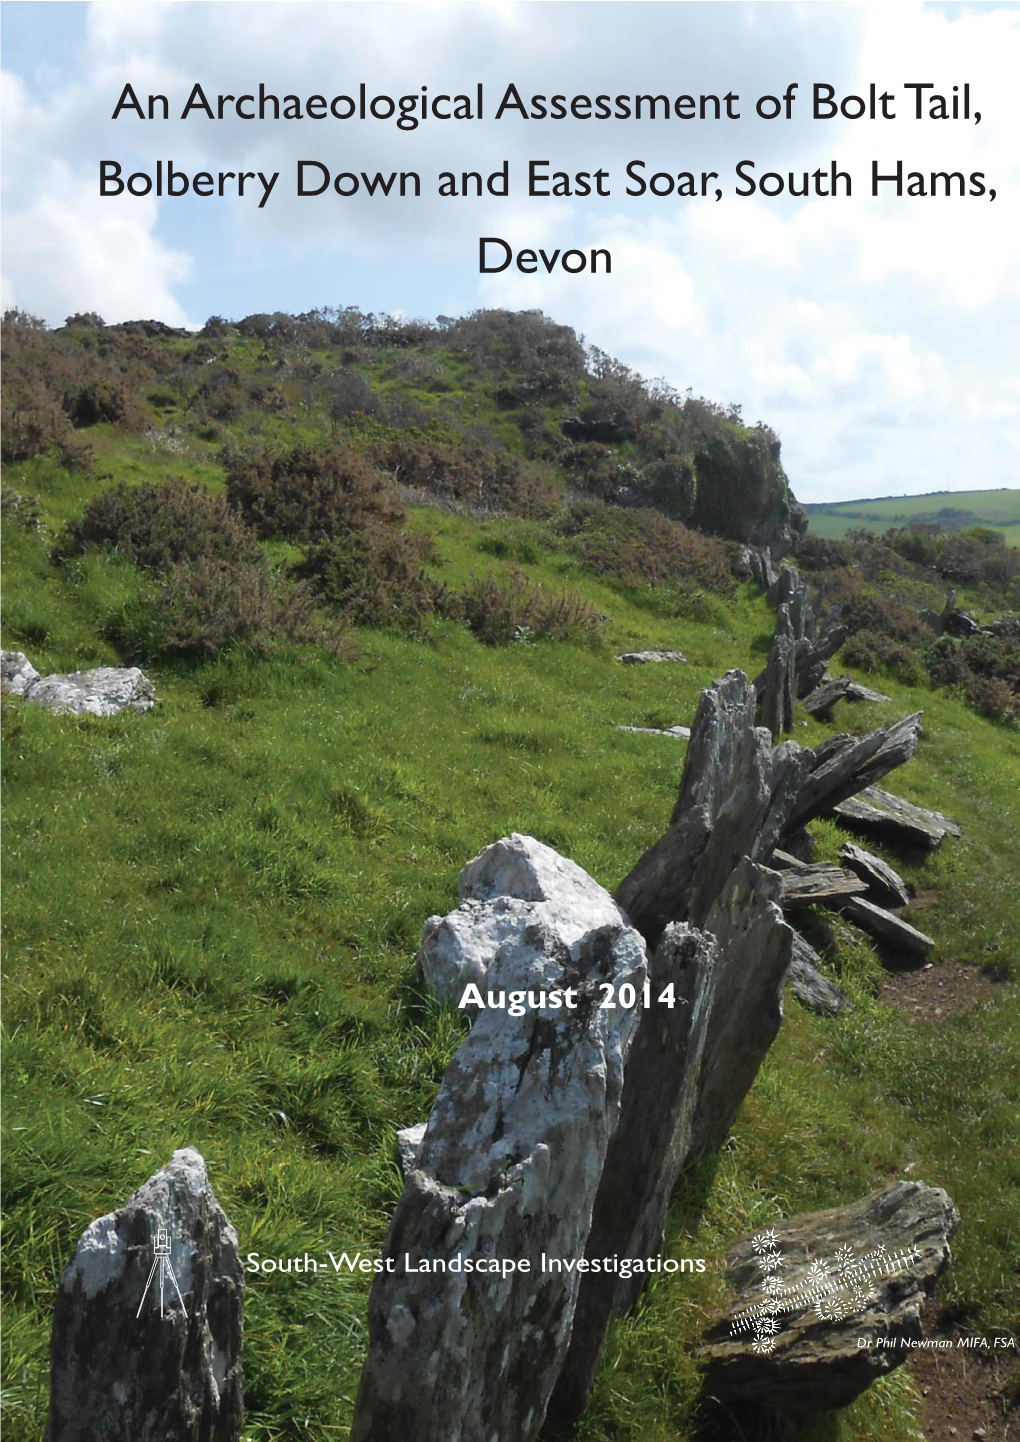 An Archaeological Assessment of Bolt Tail, Bolberry Down and East Soar, South Hams, Devon